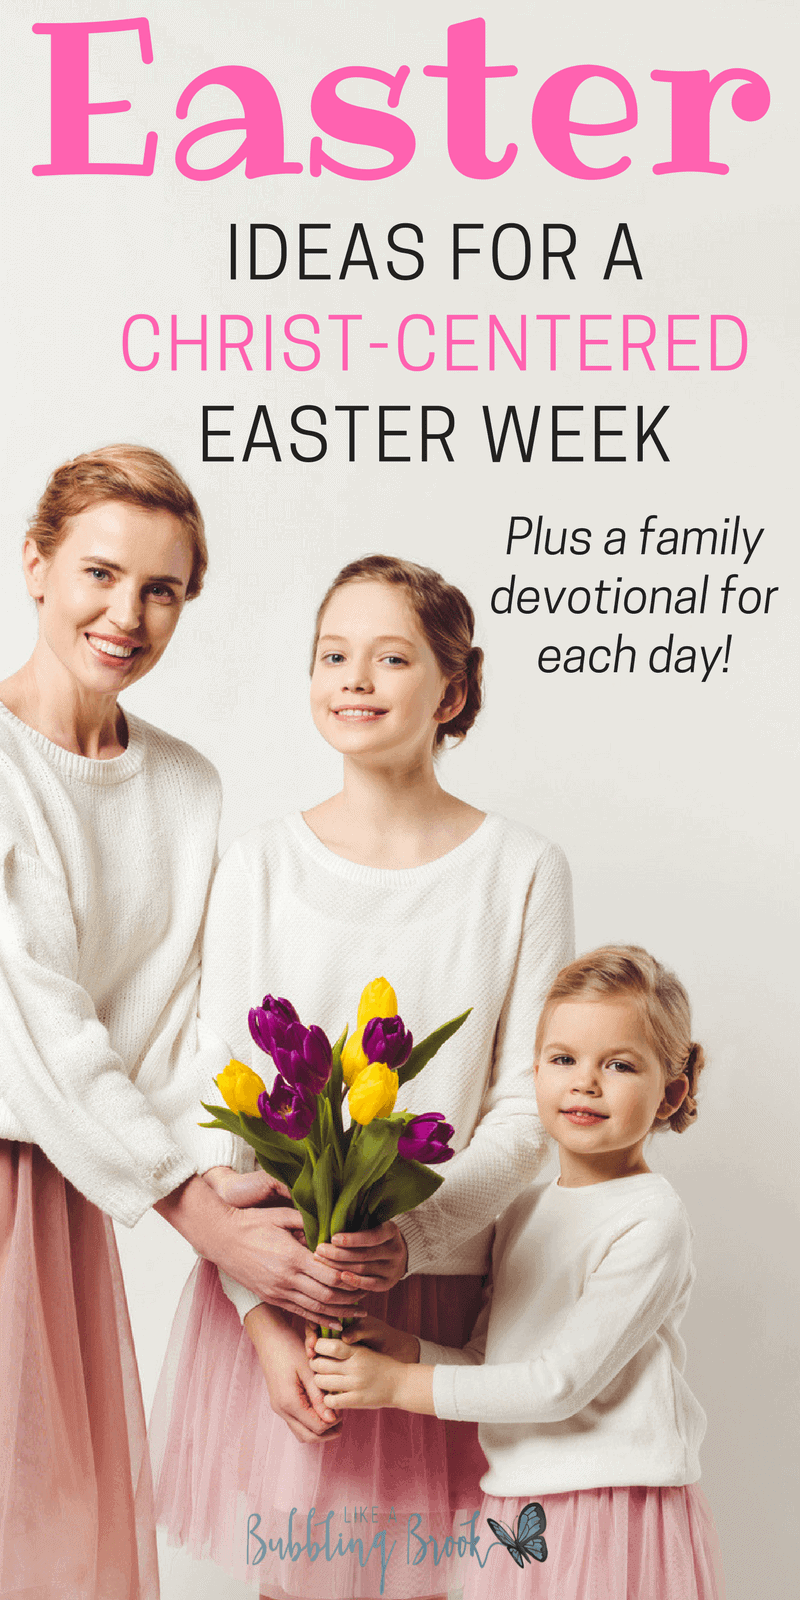 Christian Easter Ideas For Having a Christ-Centered Easter Week (Plus Devotionals For The Week!)